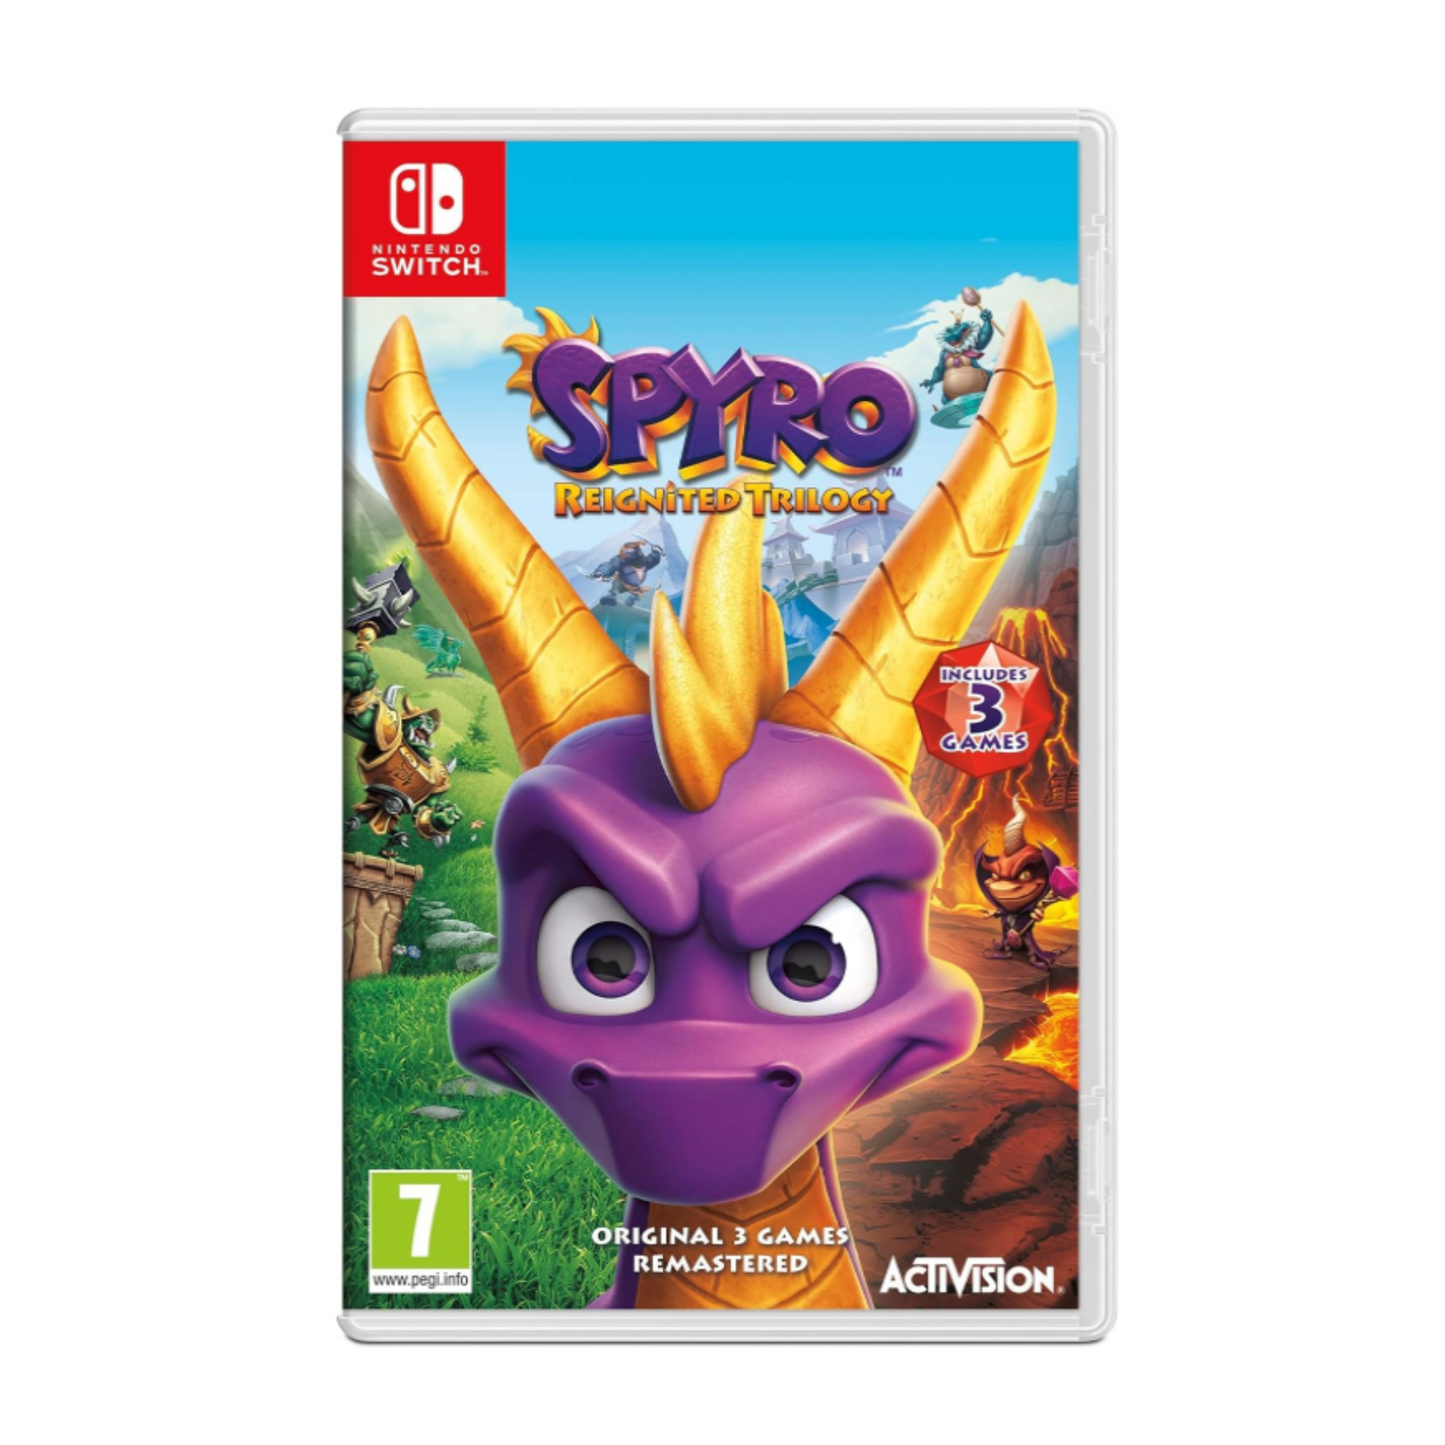 Spyro Reignited Trilogy video game for Nintendo Switch